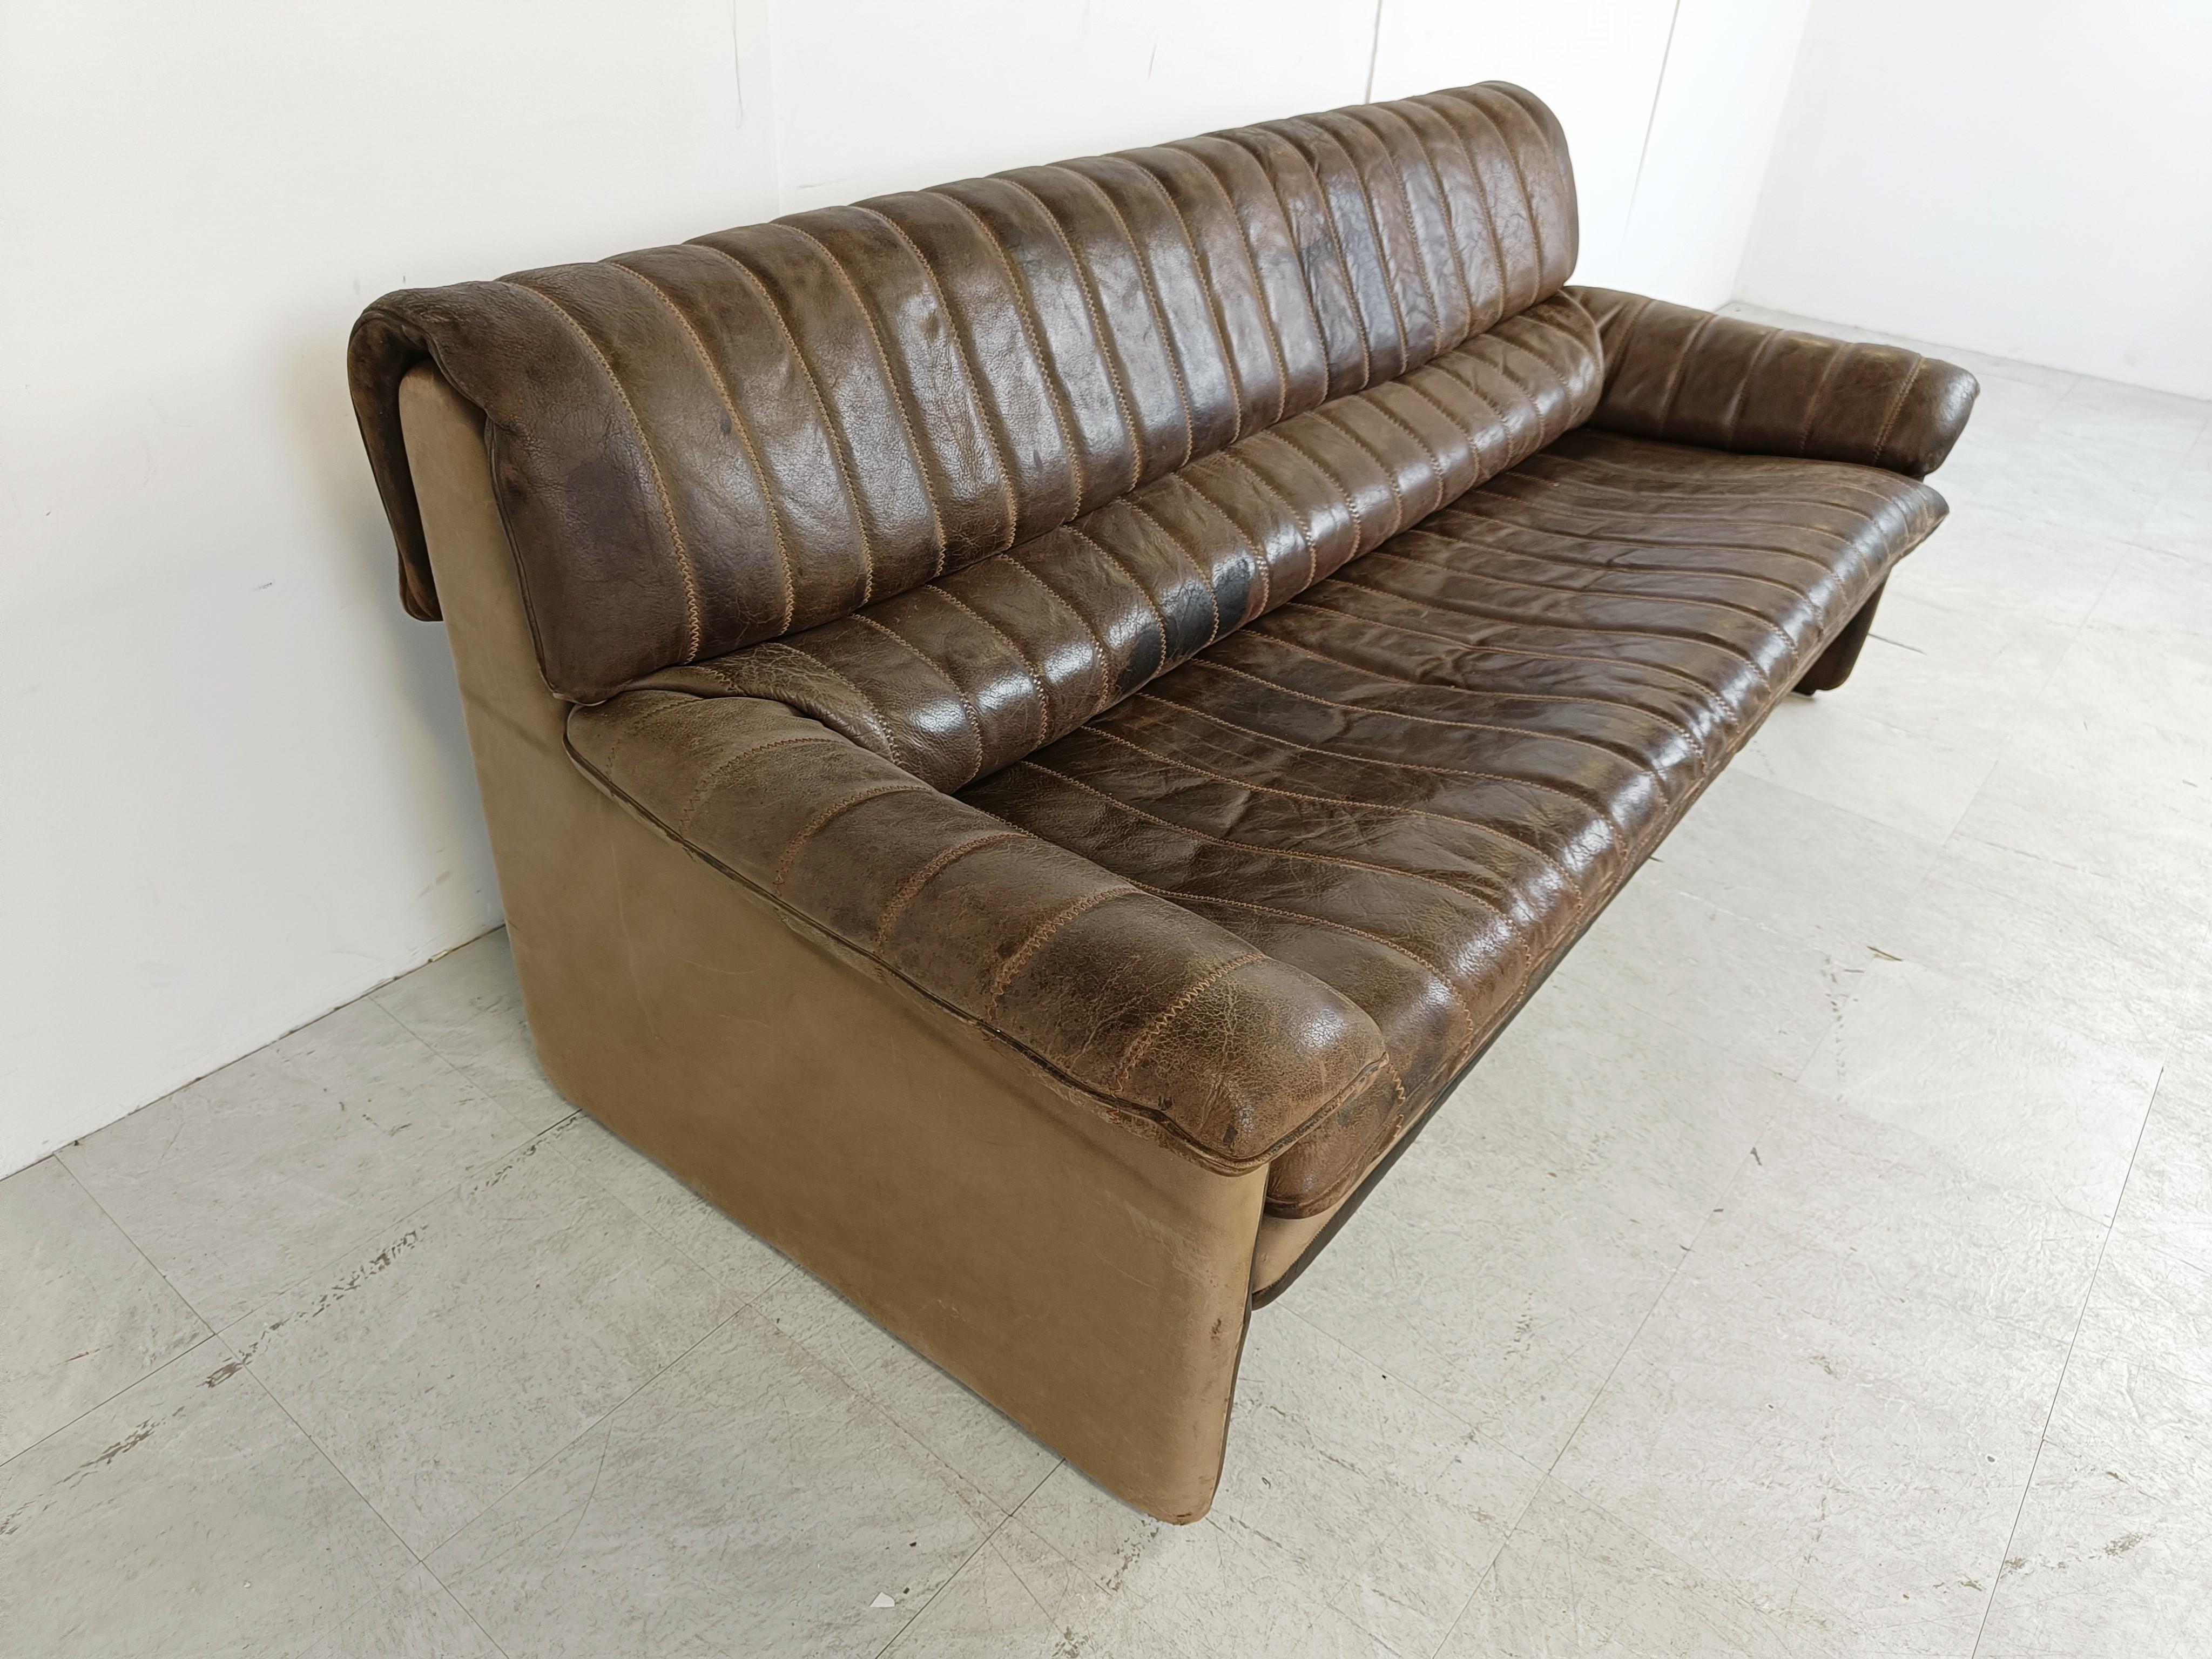 De Sede Ds86 Sofa in Brown Leather, 1970s For Sale 1